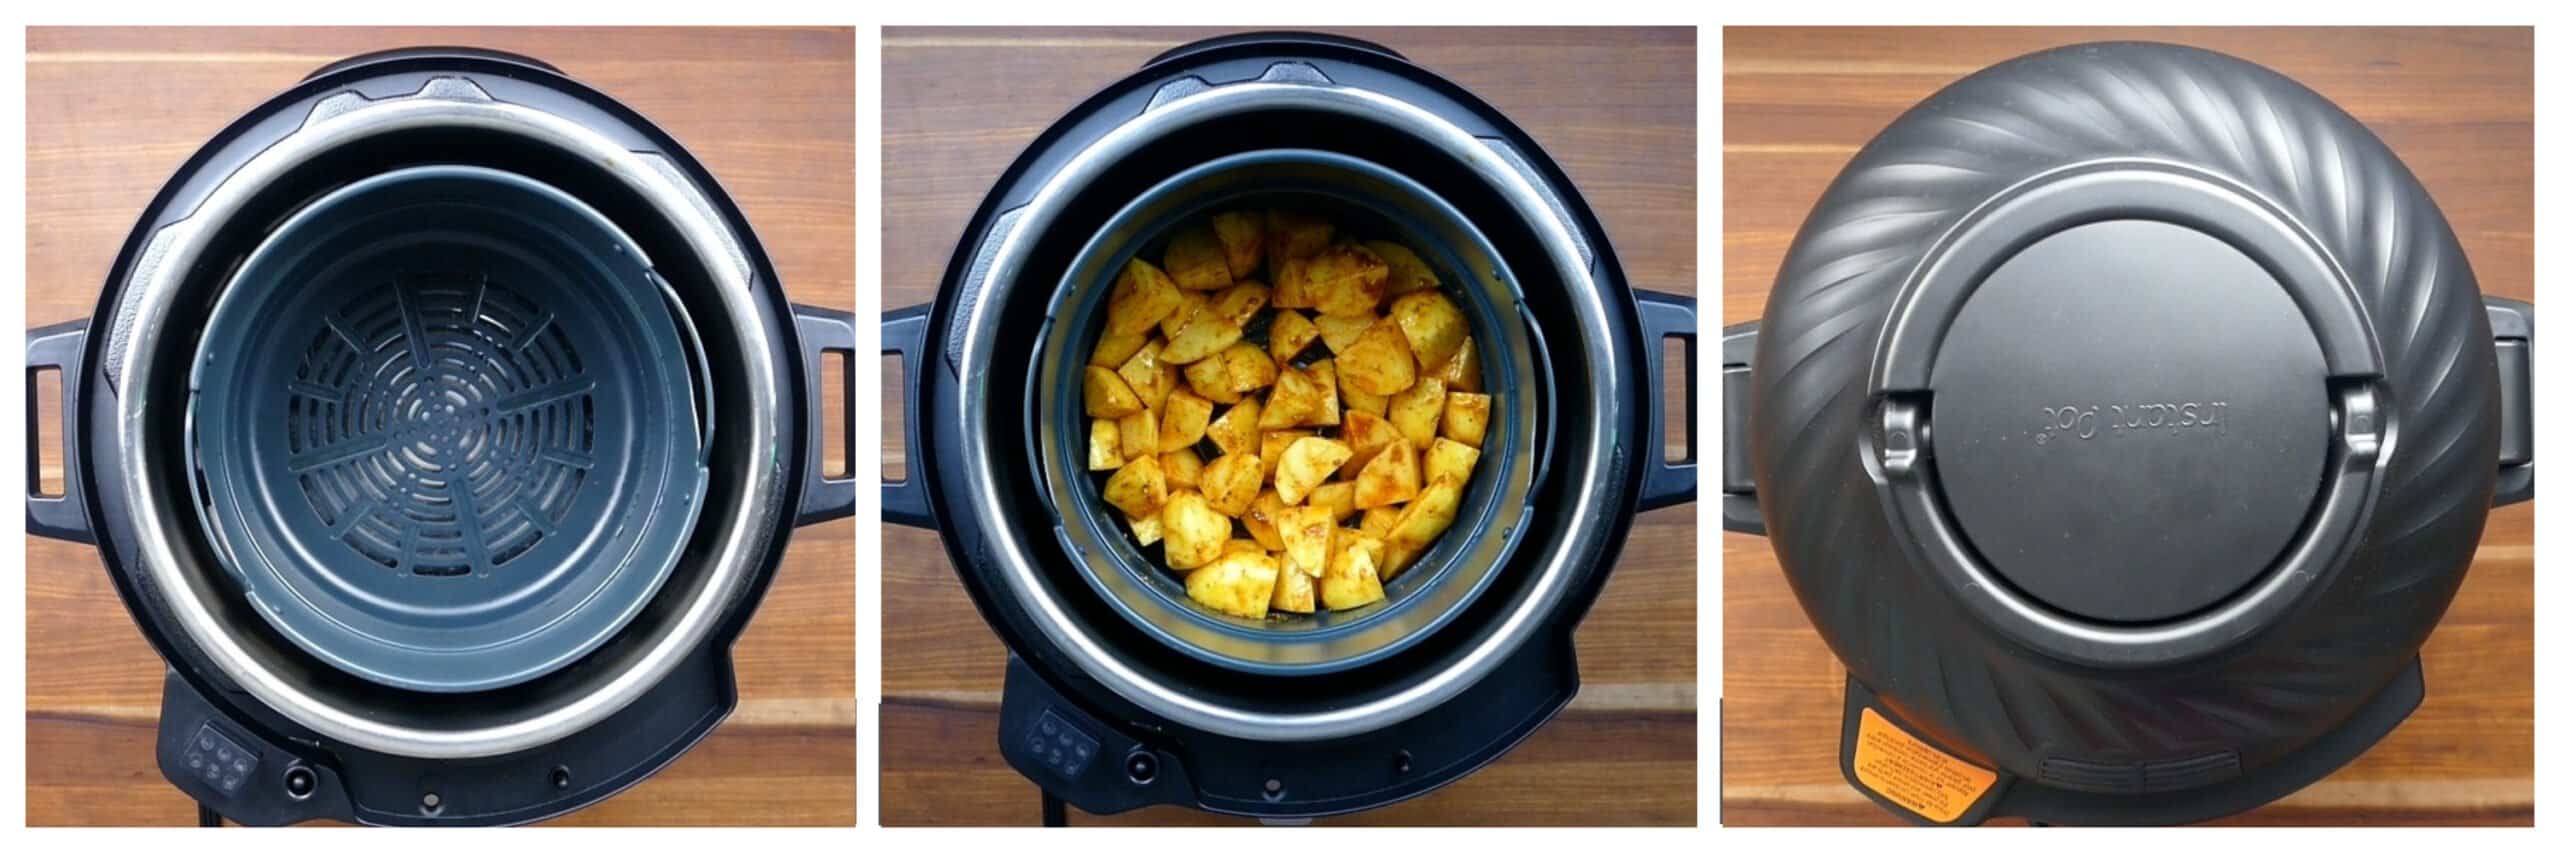 Air fryer potatoes instructions collage - oiled basket, potatoes in basket, air fryer lid on